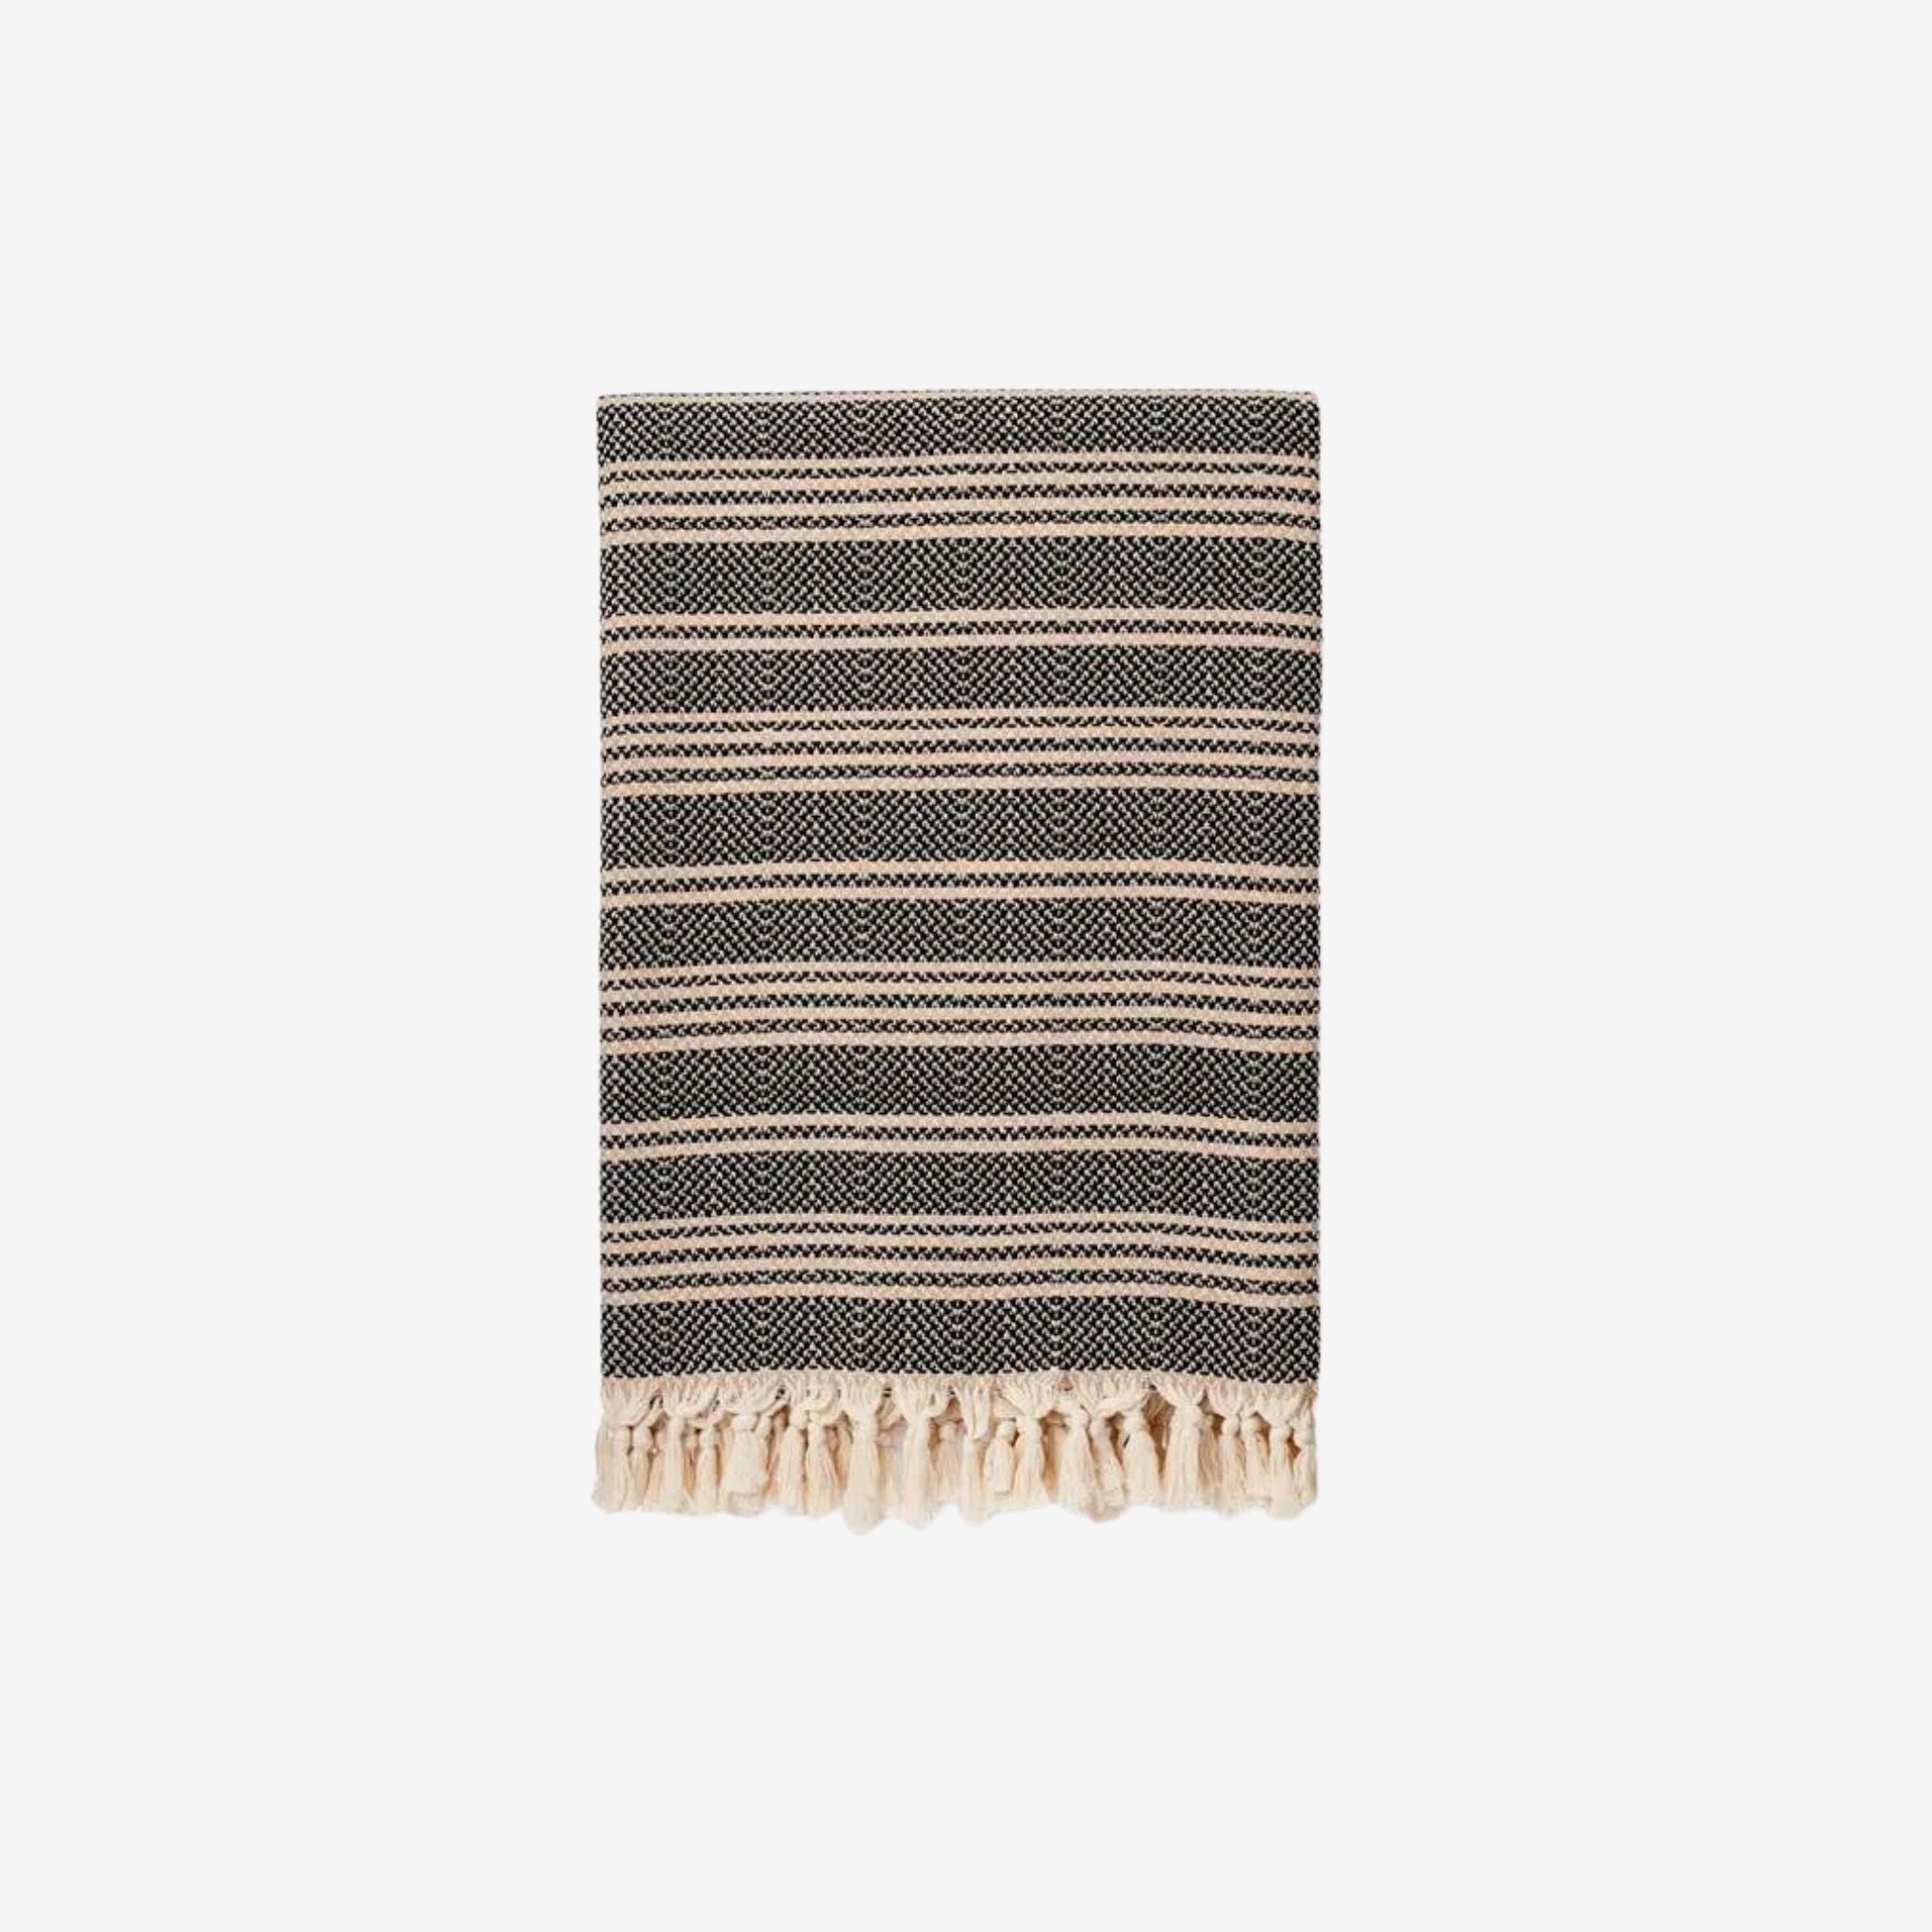 HILMI HAND LOOMED COTTON BLANKET - BLACK - SIMPLY ELEVATED HOME FURNISHIG 